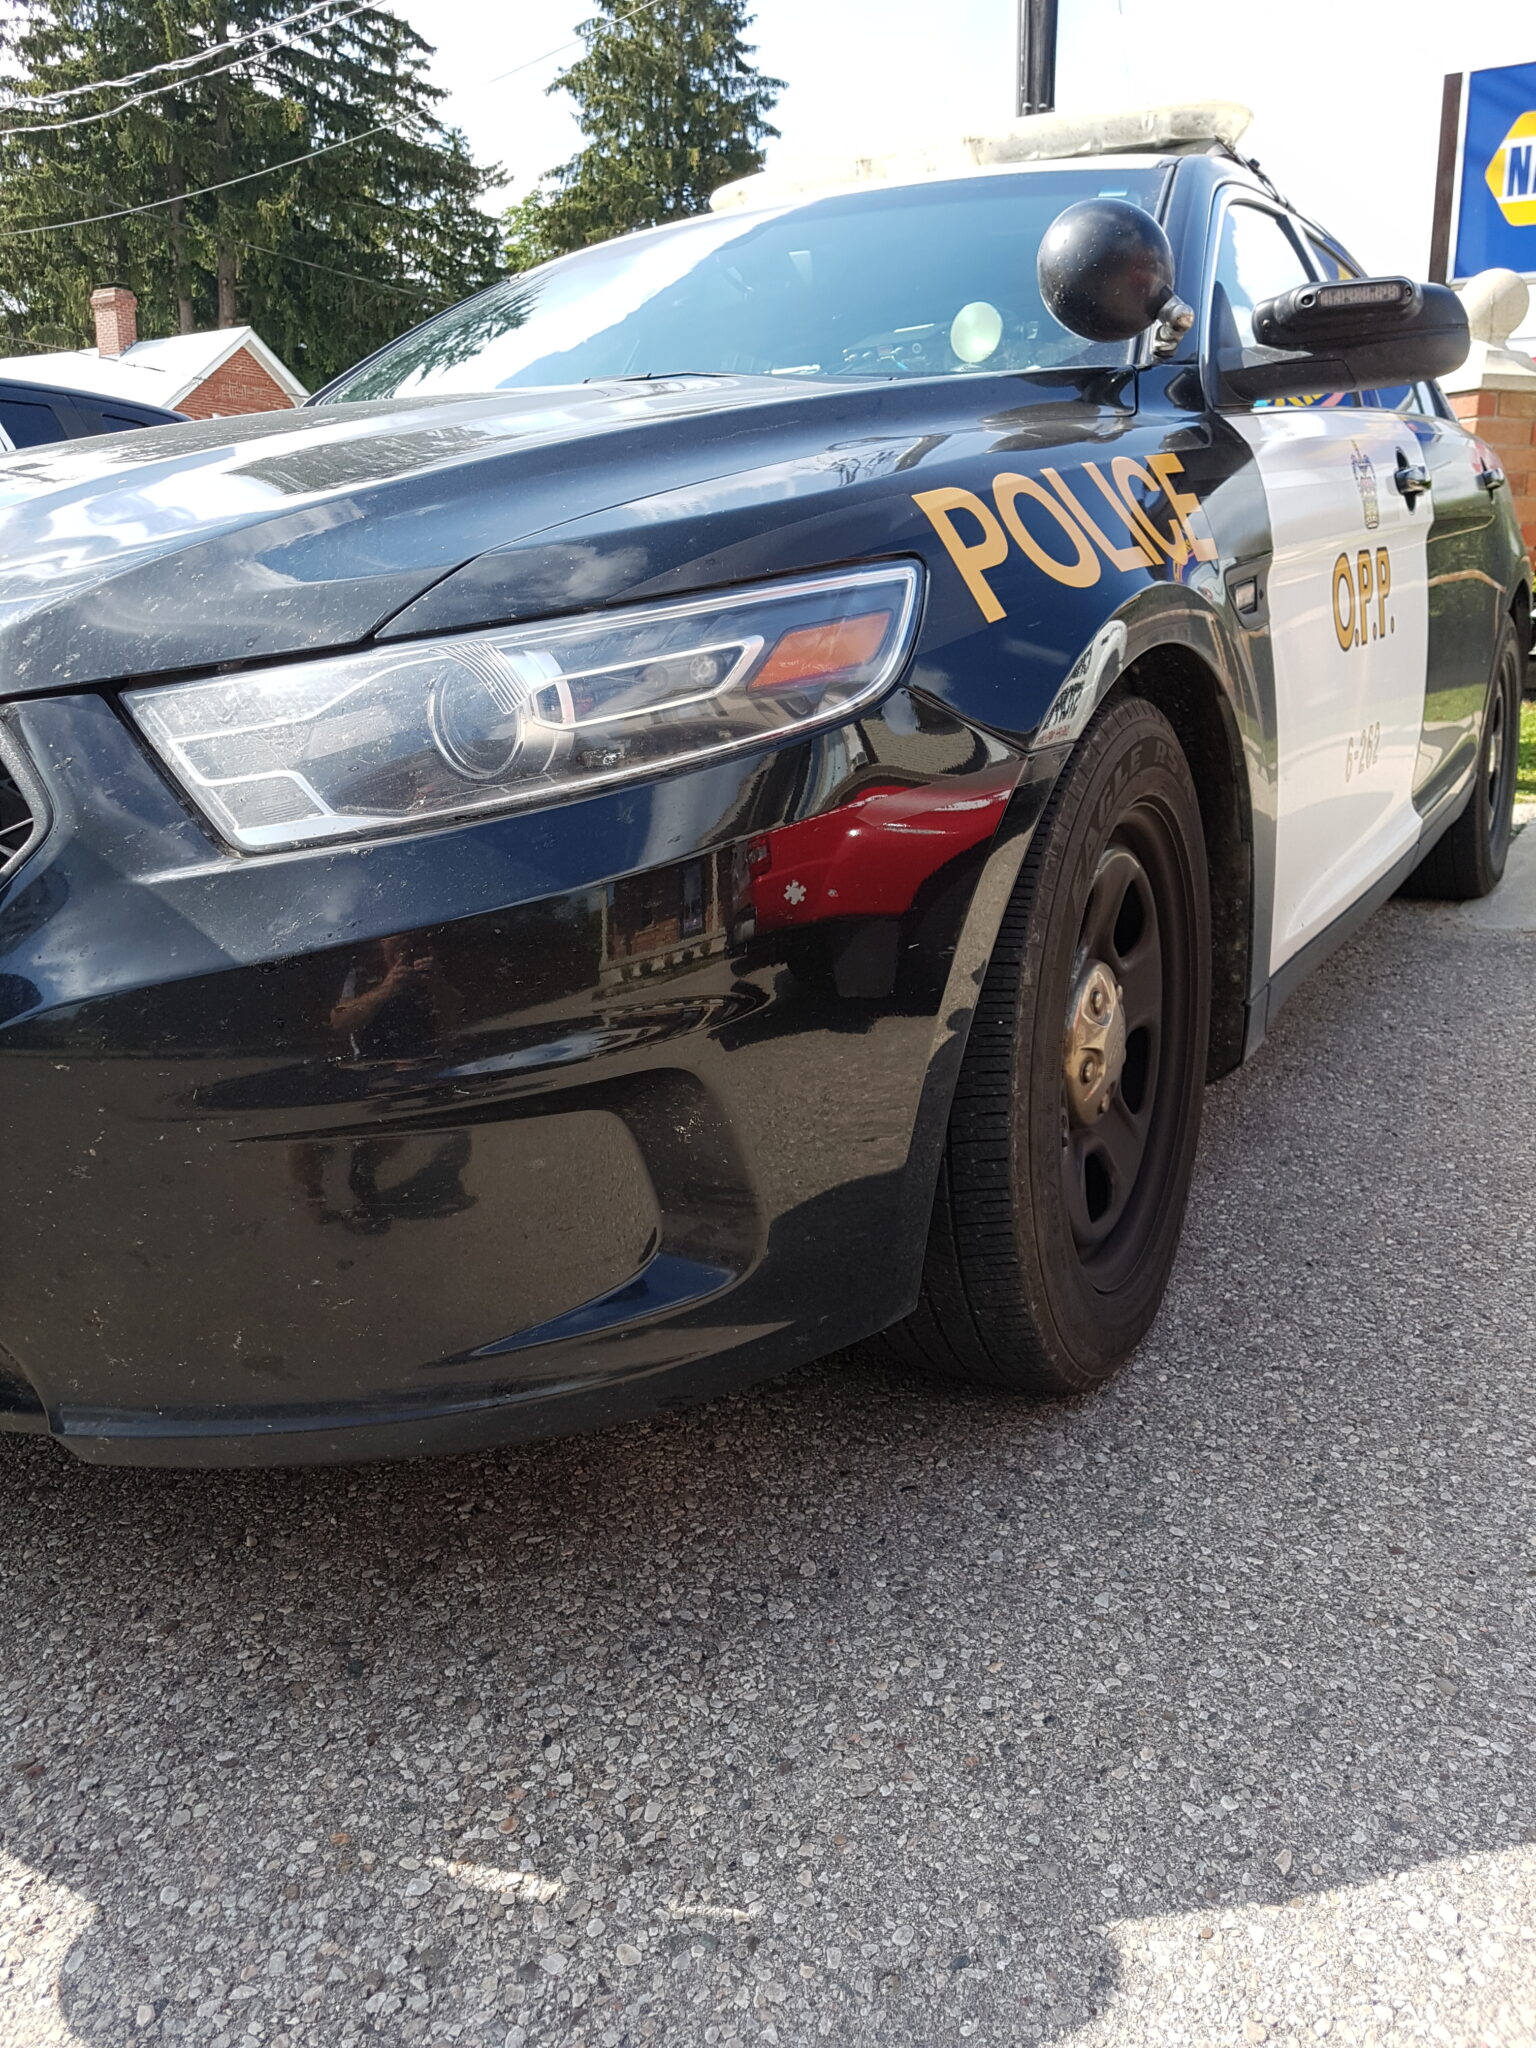 One person died Saturday evening in a single-vehicle collision near Mount Forest